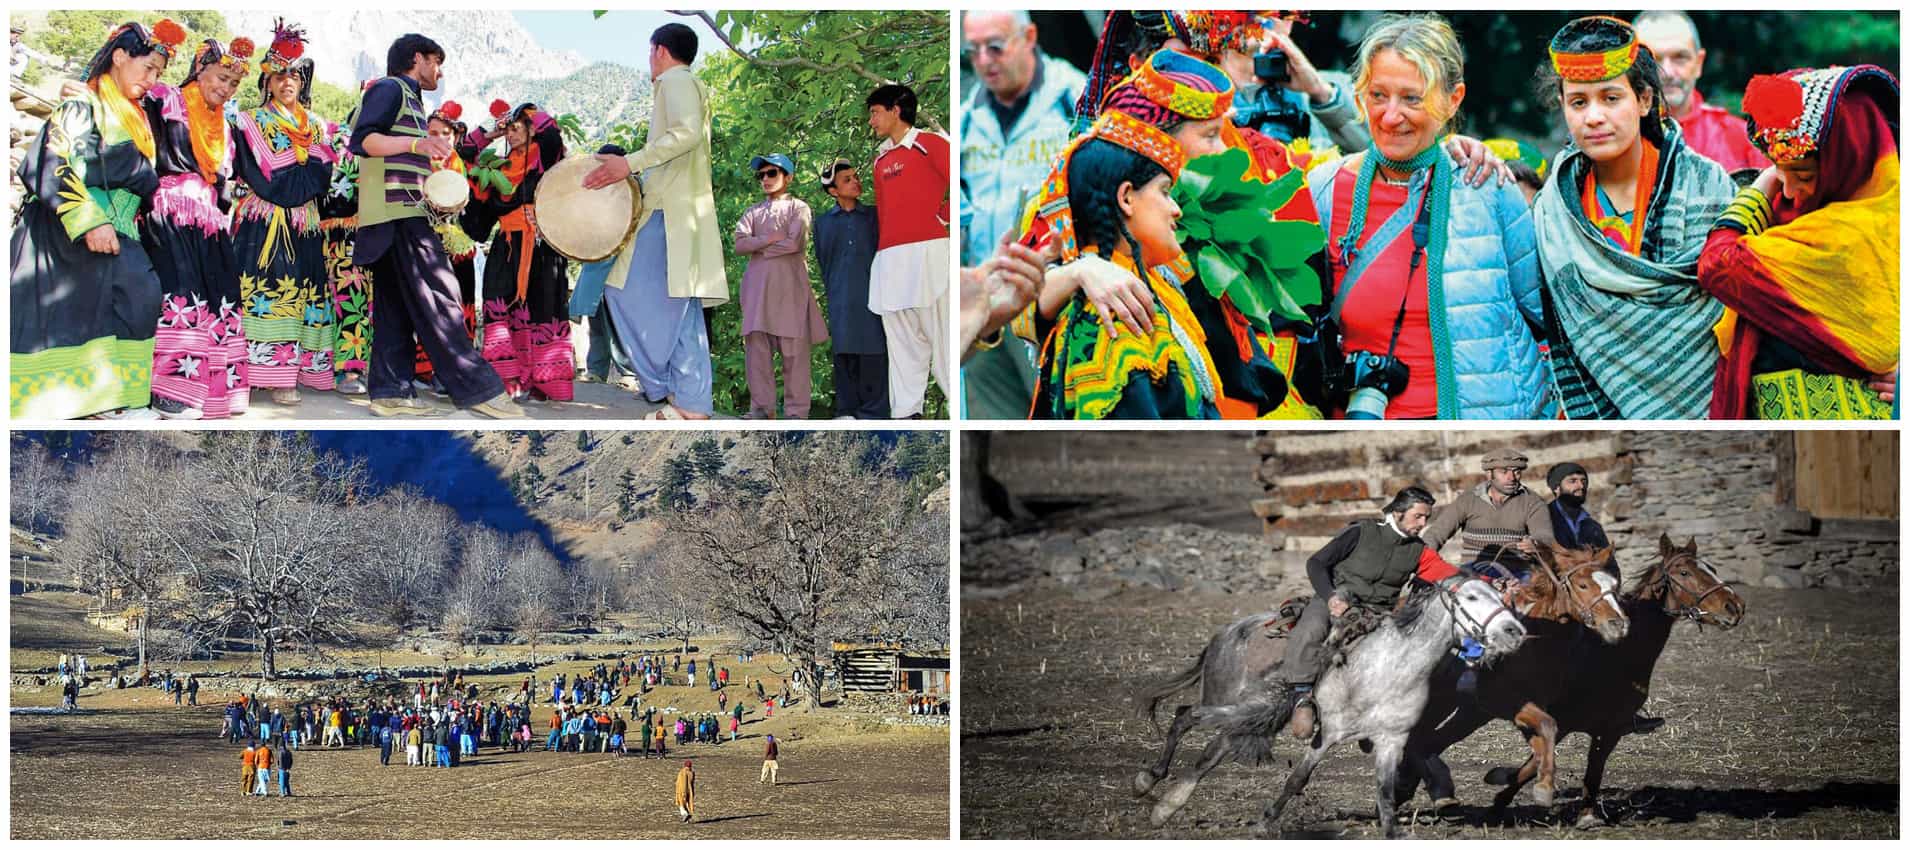 Local-and-Foreign-Tourists-Enjoy-Festival-Activities-in-Valley-Of-Kalash